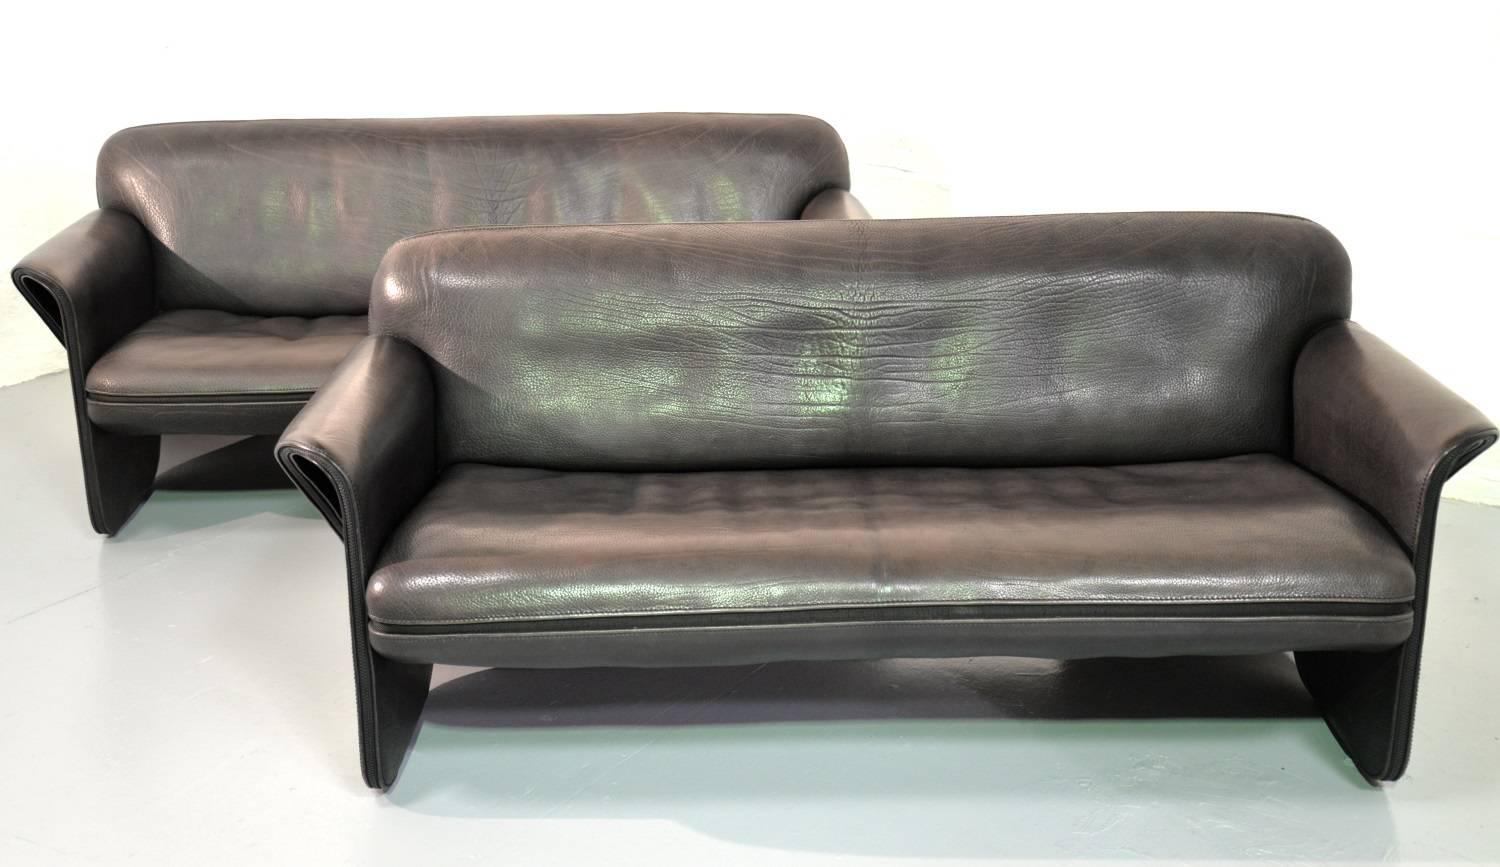 Discounted airfreight for our US and International customers ( from 2 weeks door to door )

The Cambridge Chair Company brings to you an ultra rare pair of vintage De Sede DS 125 sofas designed by Gerd Lange in 1978. These sculptural pieces are